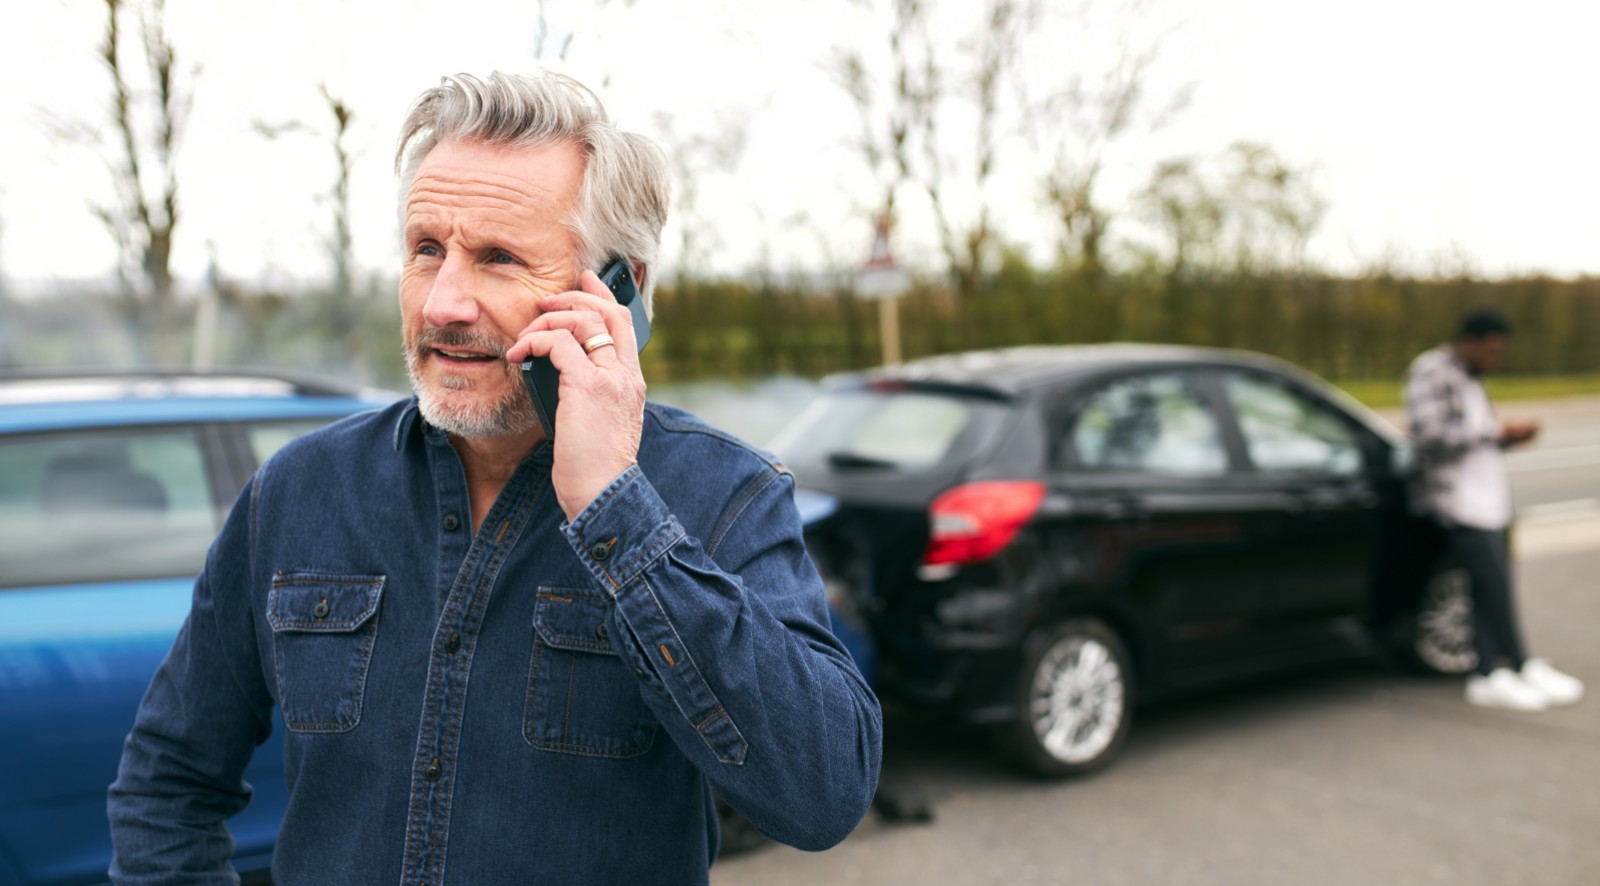 A driver making a phone call after a car accident